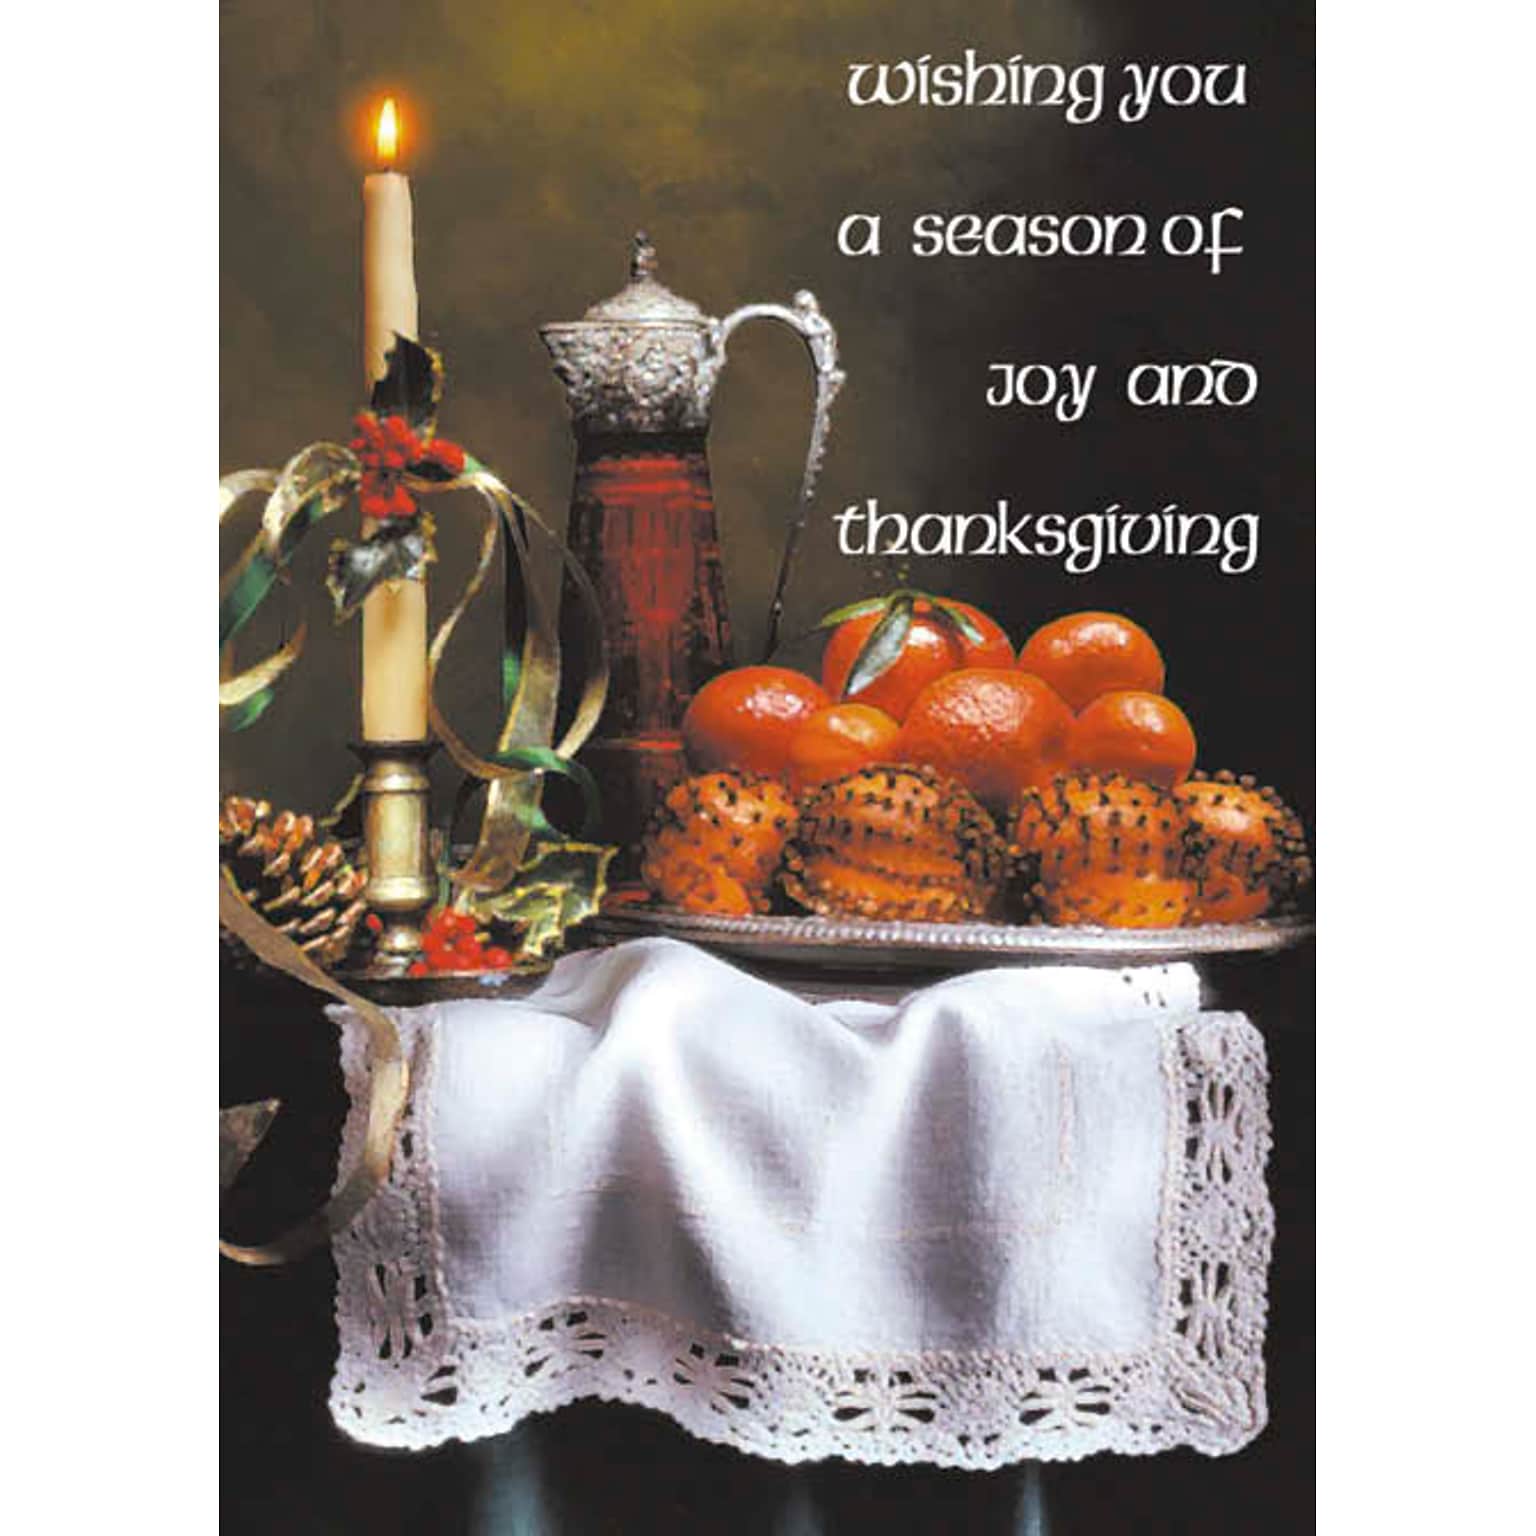 Wishing You A Season Of Joy And Thanksgiving Holiday Greeting Cards, With A7 Envelopes, 7 x 5, 25 Cards per Set